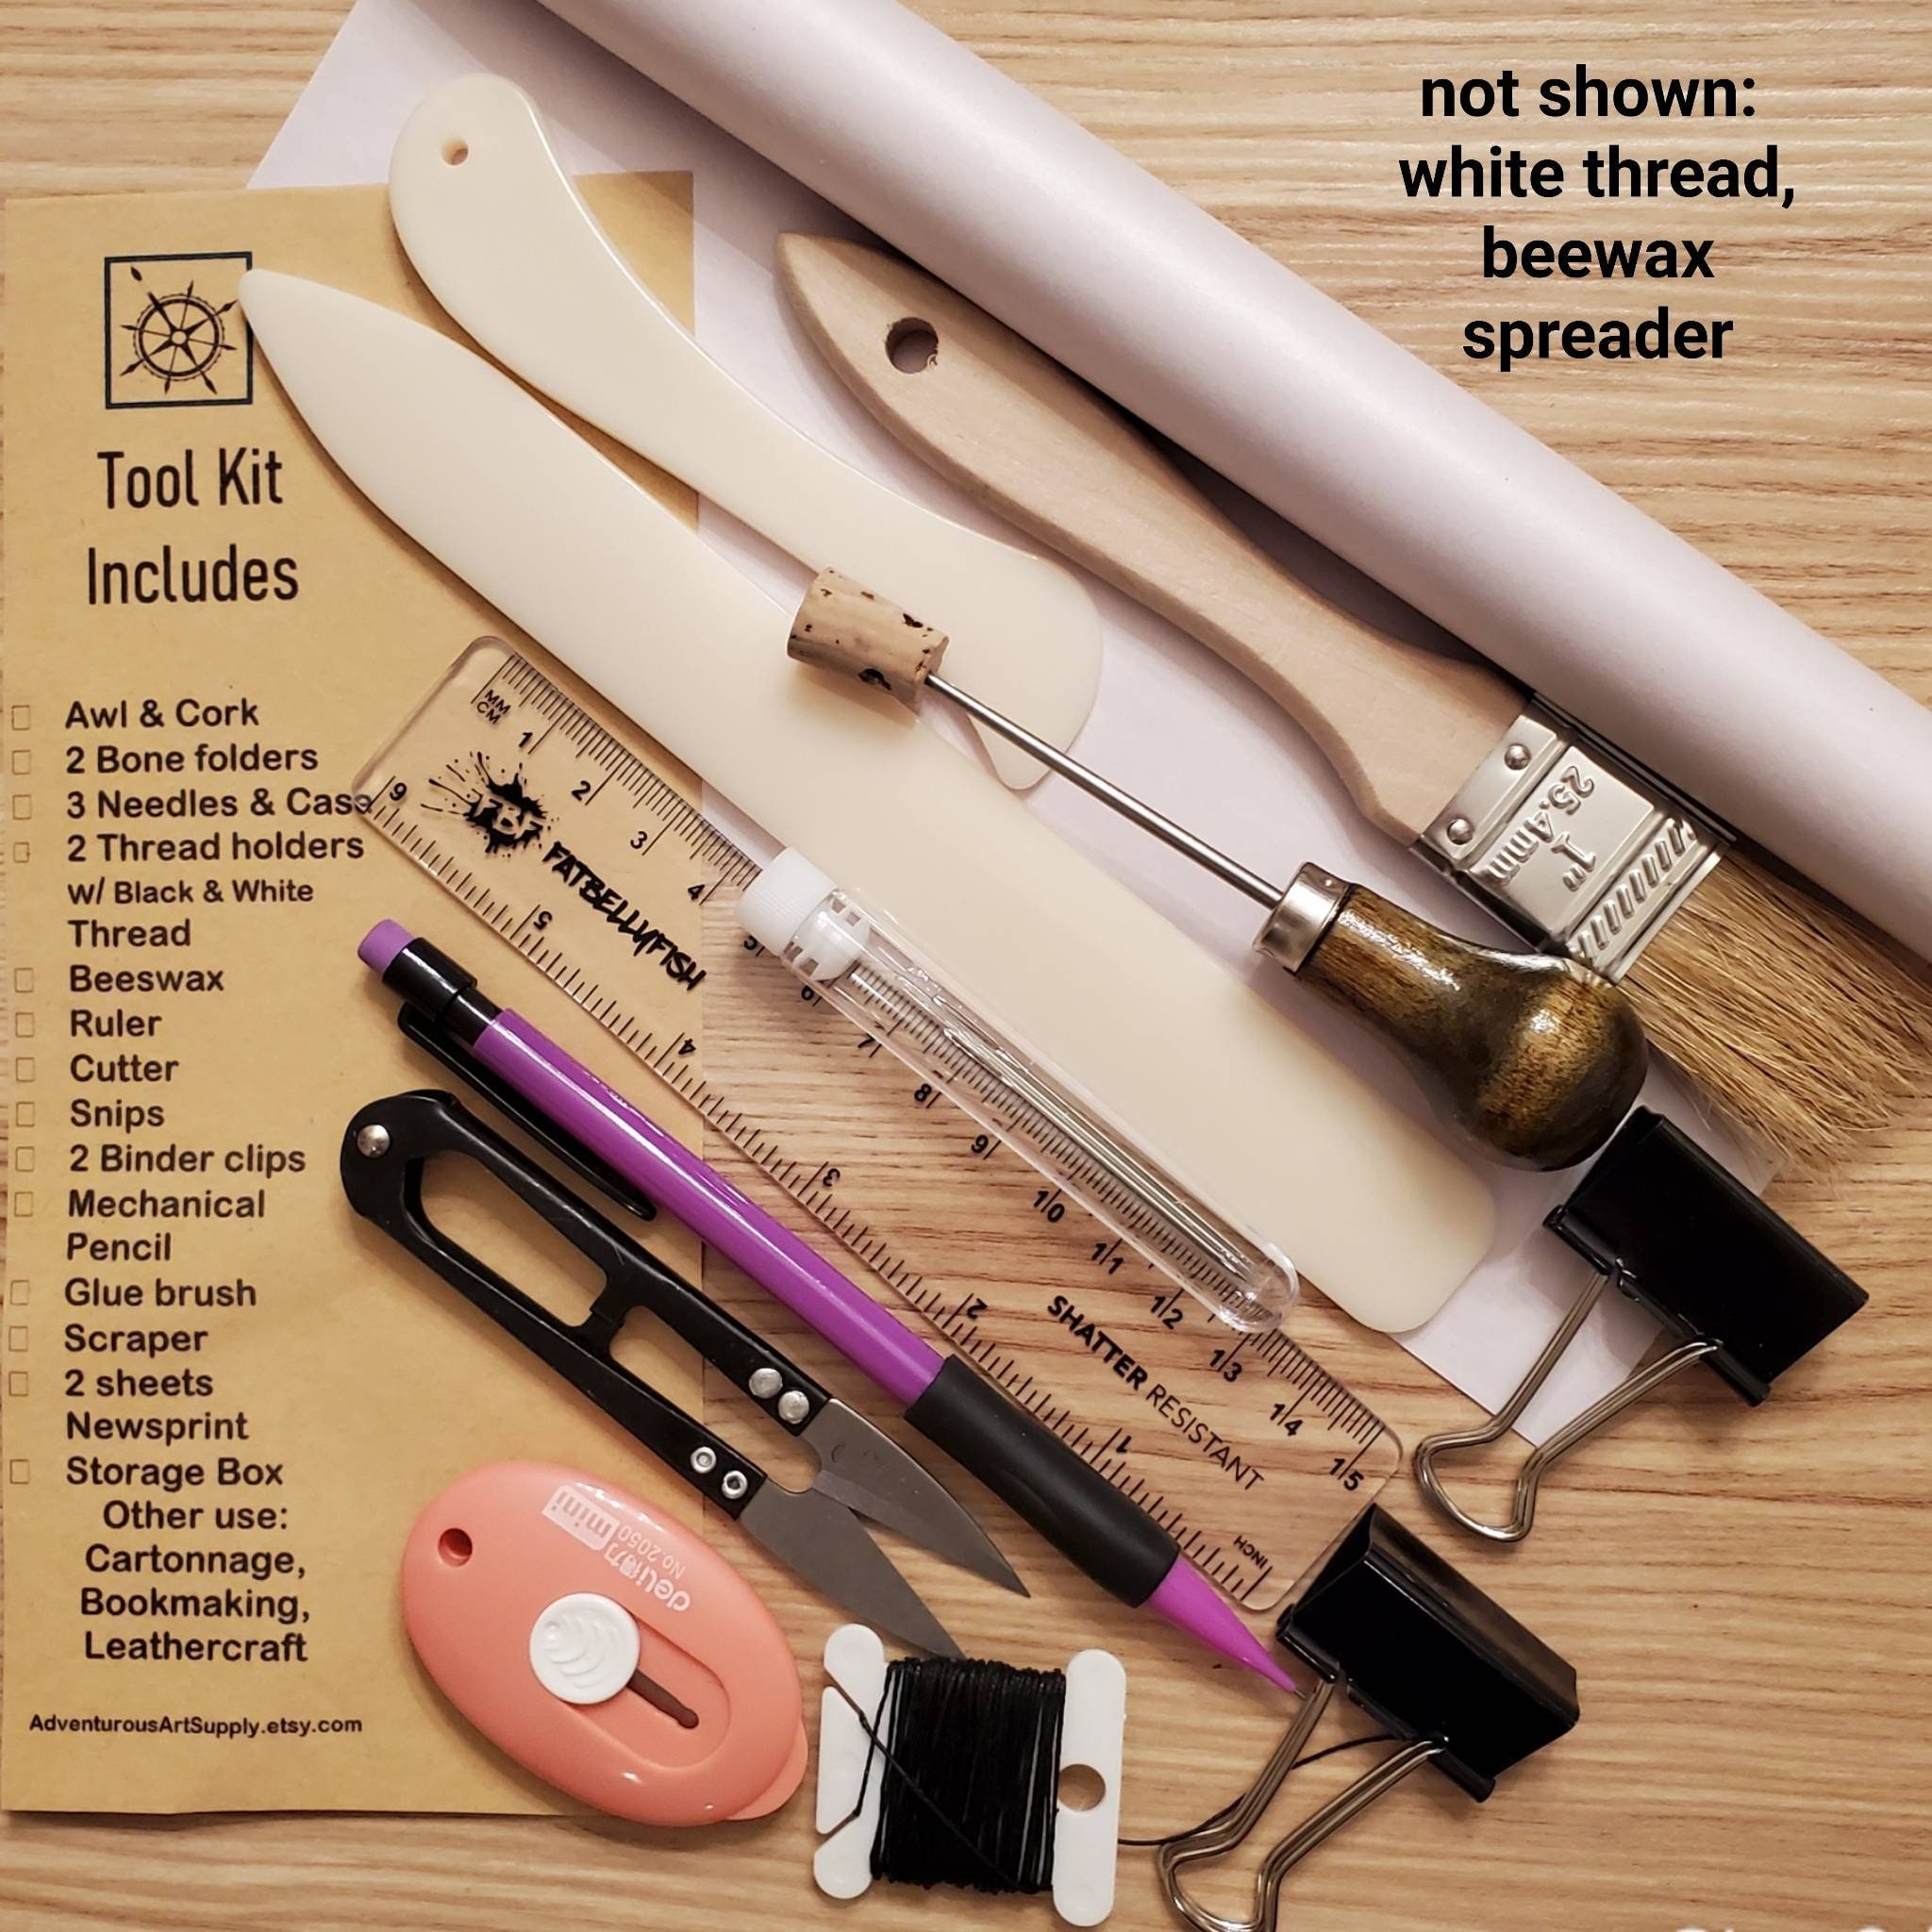 Basic Bookbinding Tools (I use!) for beginners